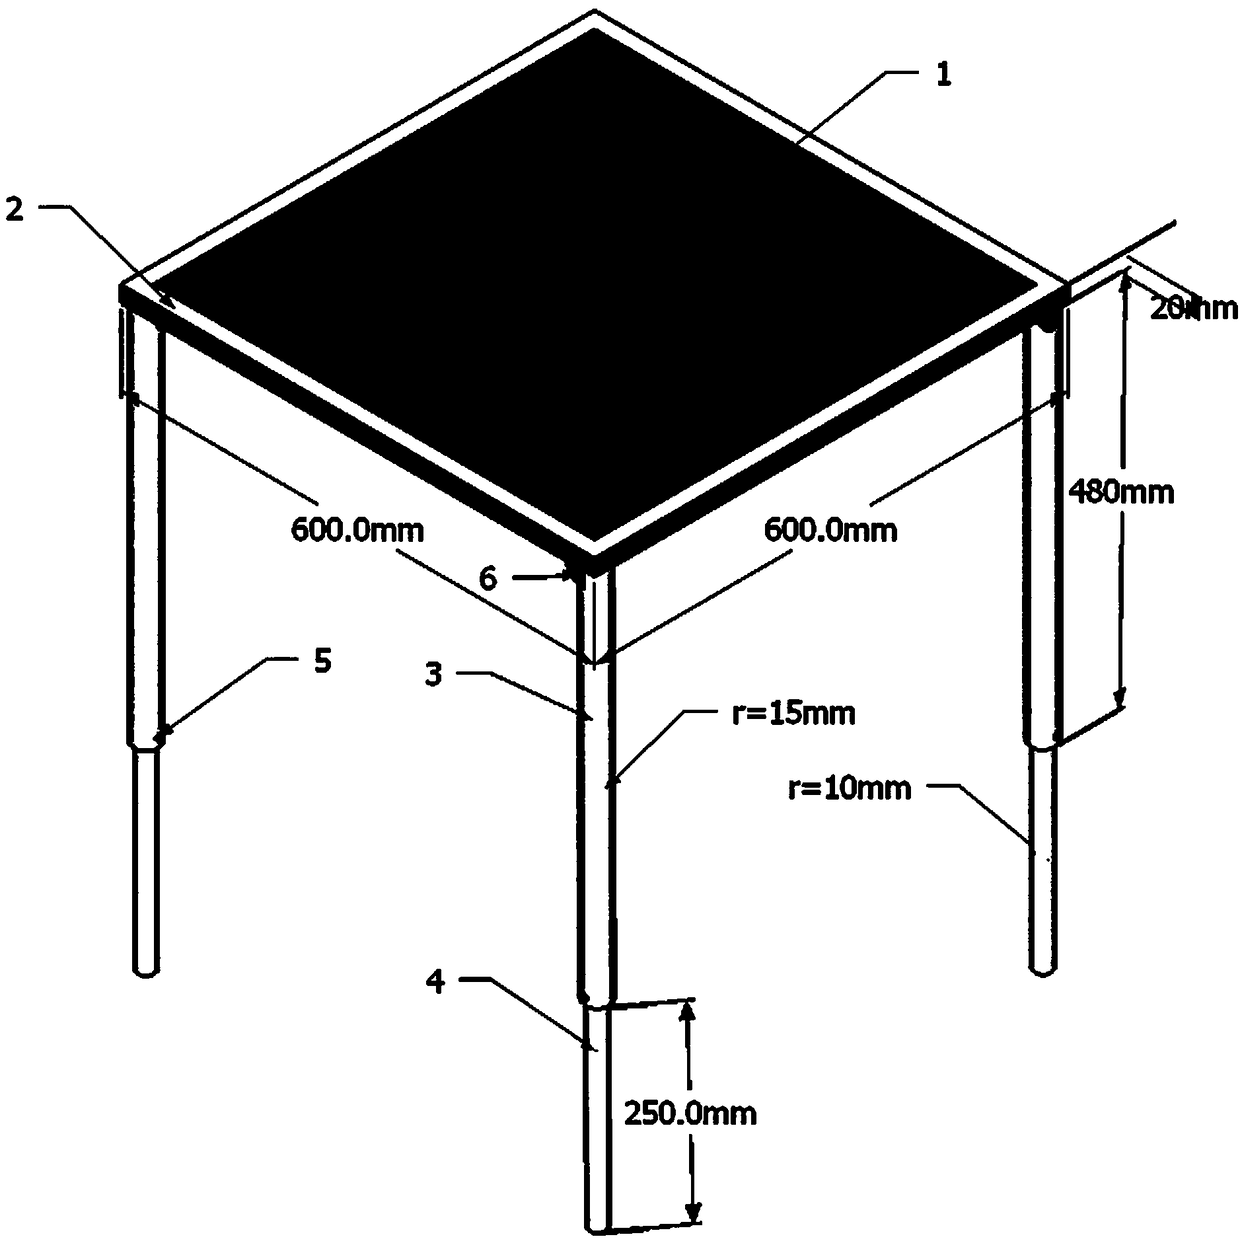 Net-less square table tennis table and competition rule for same